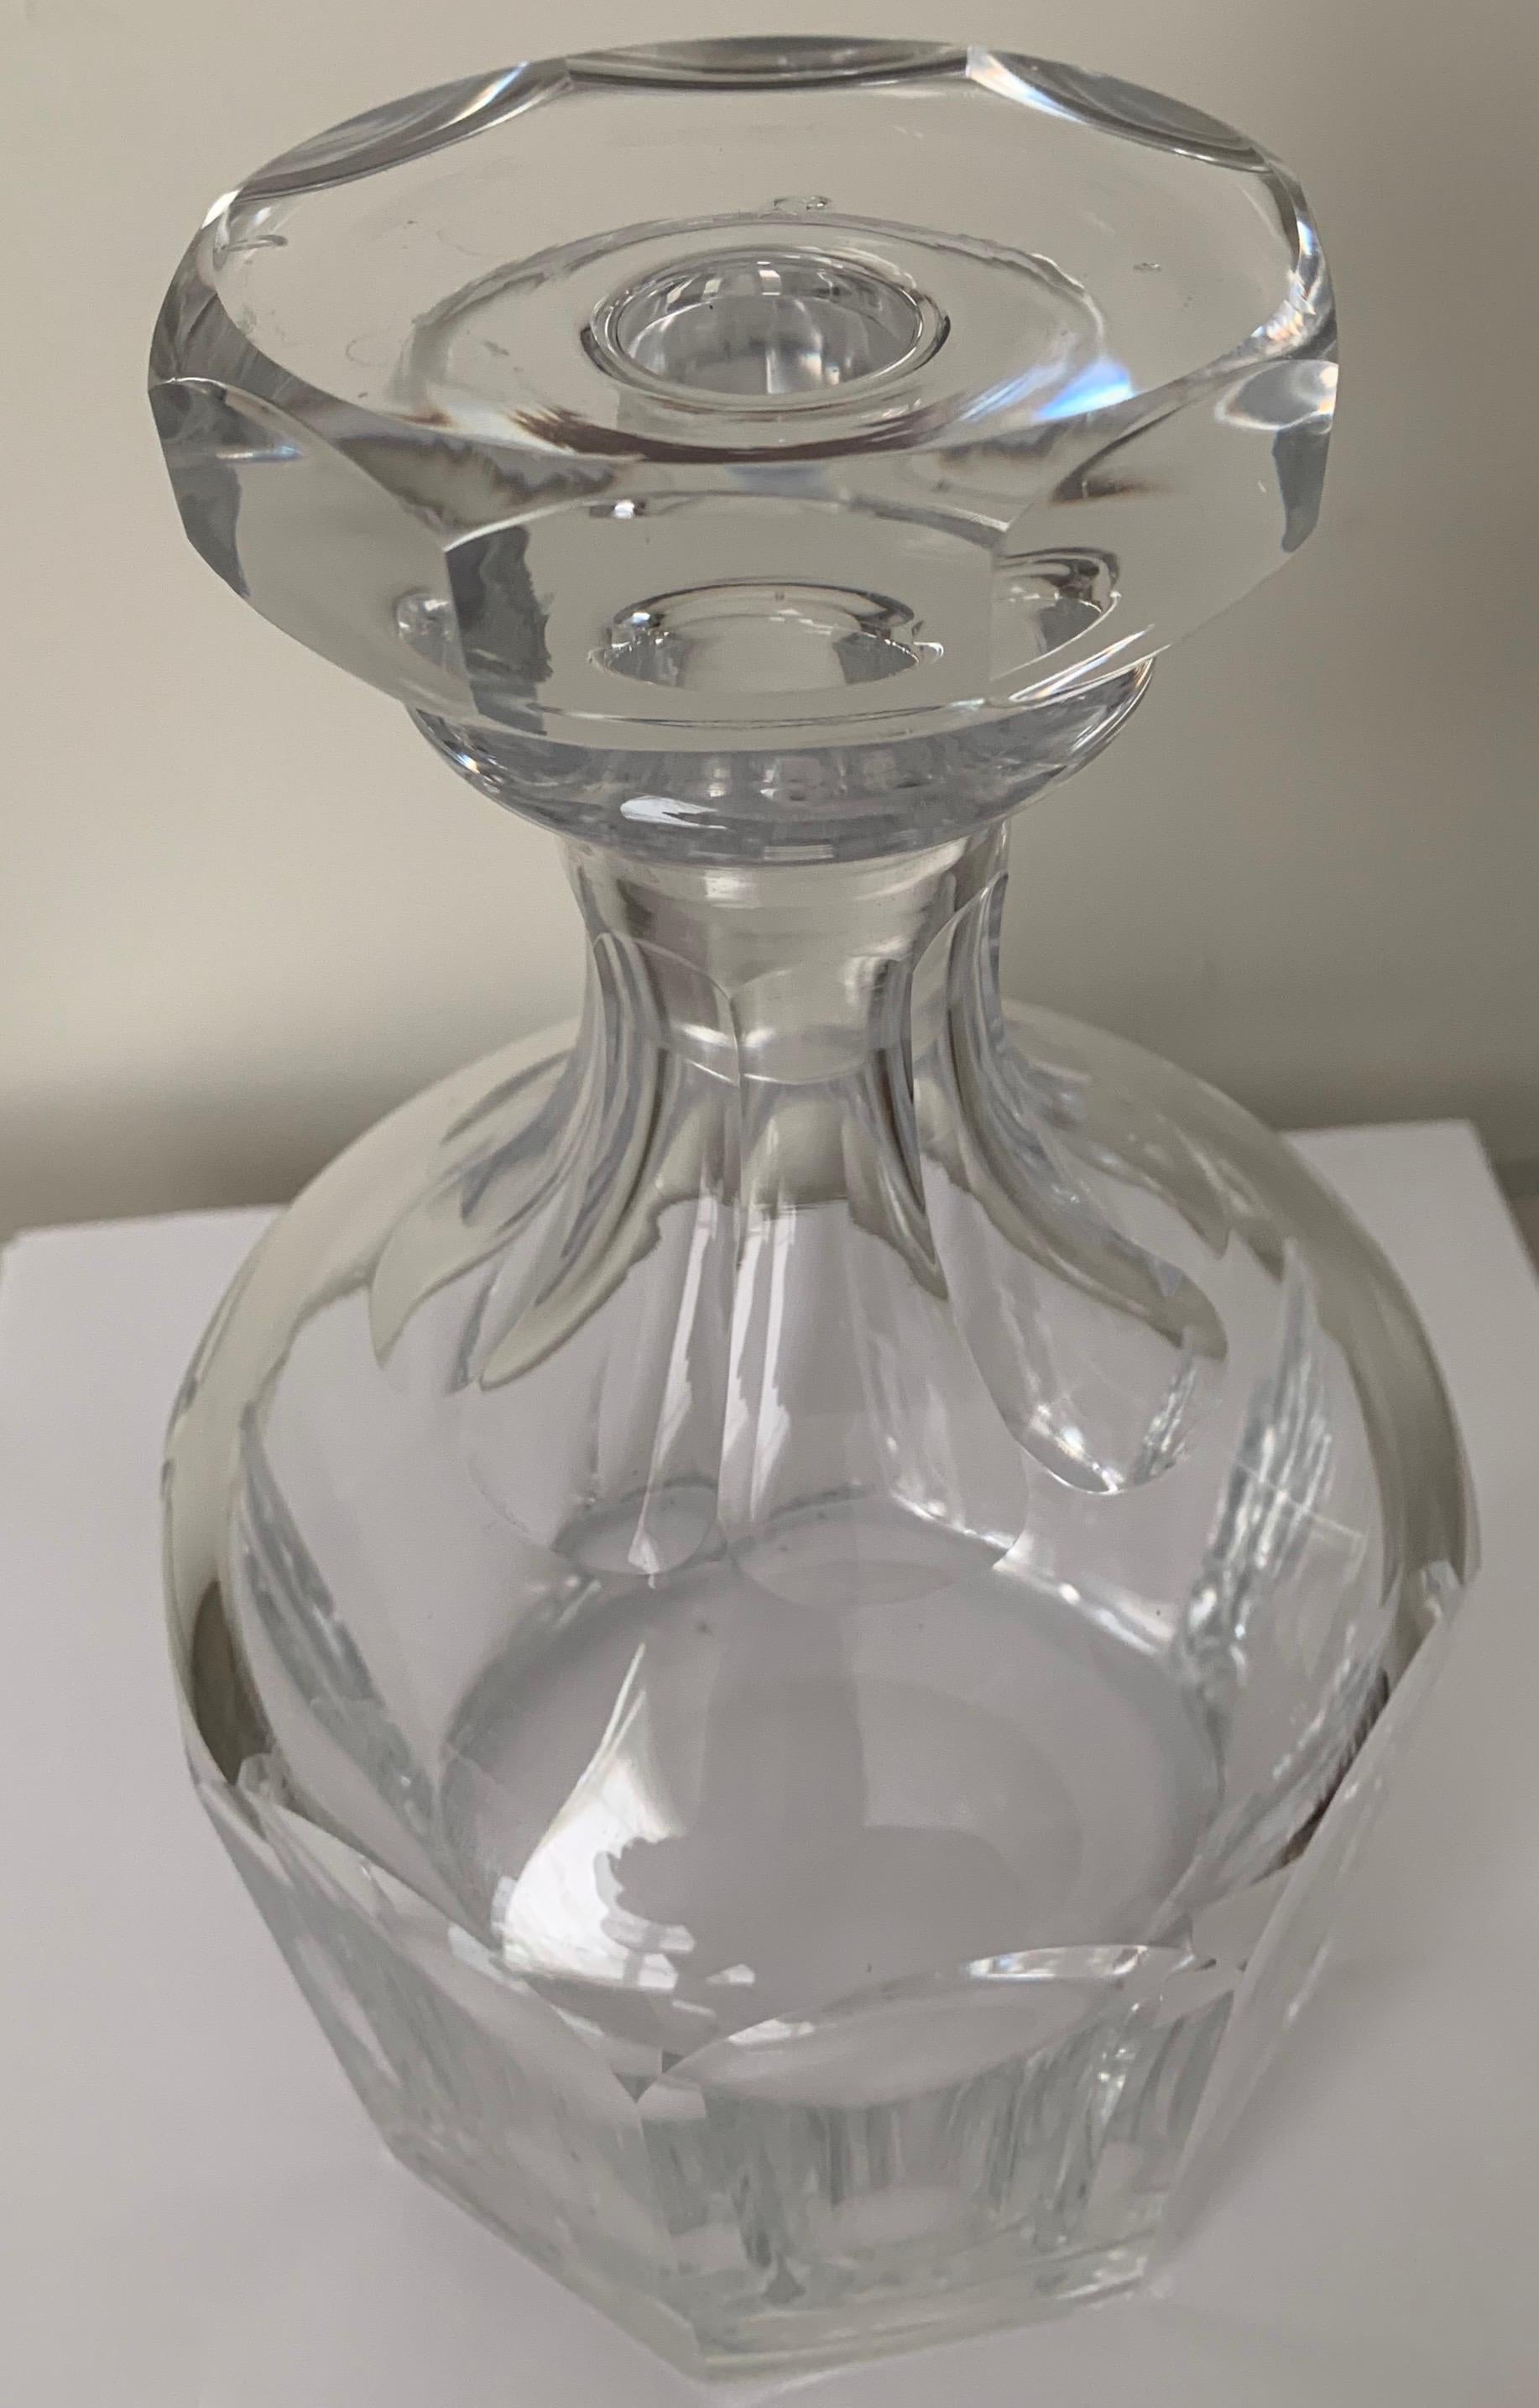 1990s Orrefors cut glass decanter. Signed on the bottom.